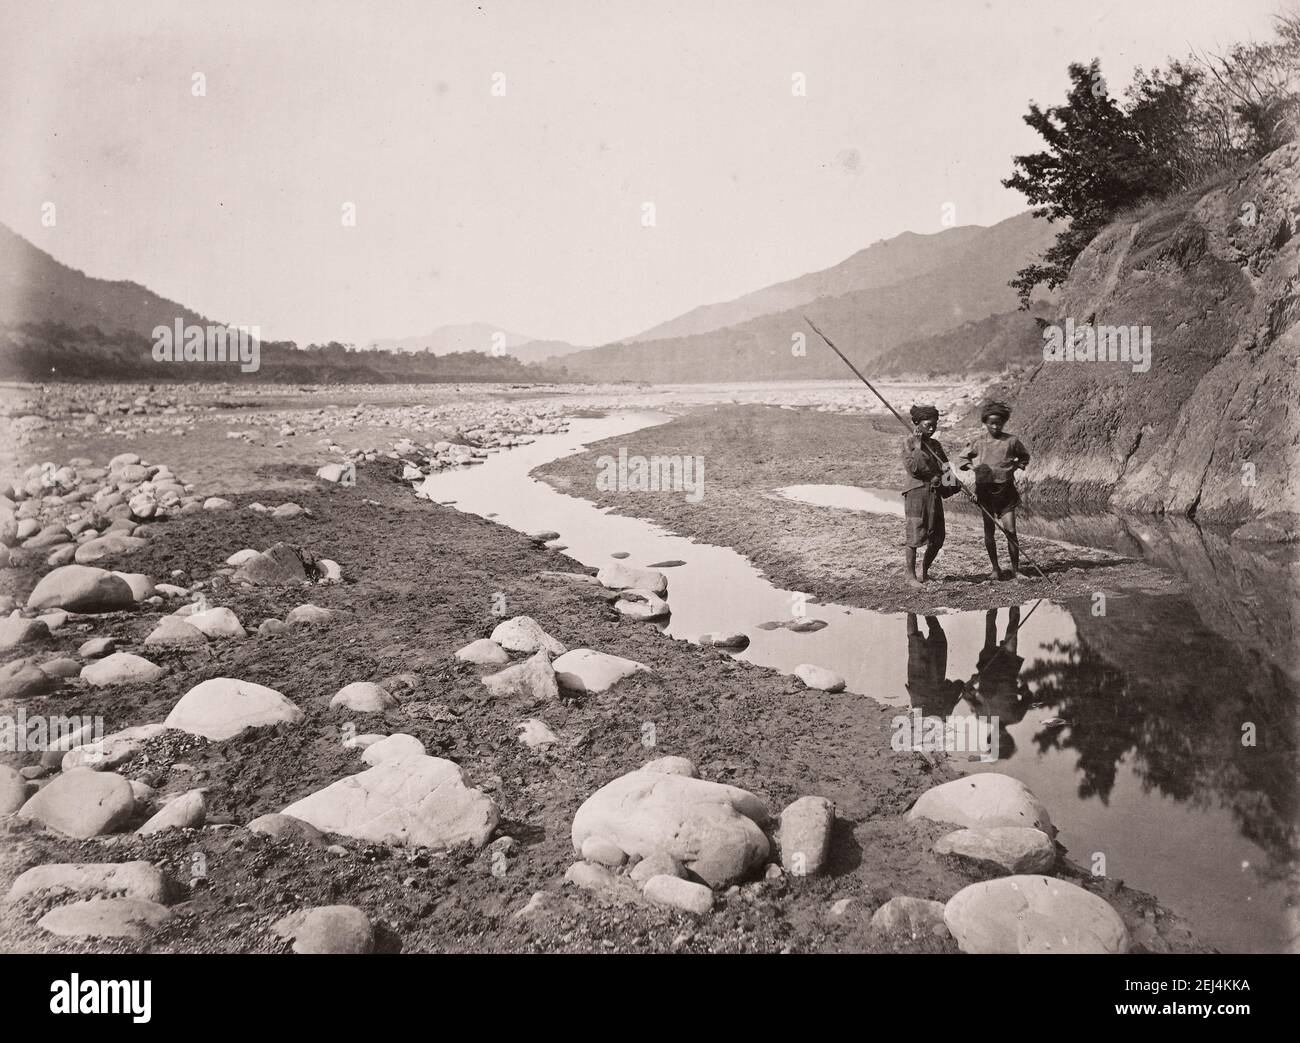 John Thomson (14 June 1837 – 29 September 1921)  Scottish photographer, active in China c.1870, from an album of his images: Lalung River, Formosa, Taiwan Stock Photo